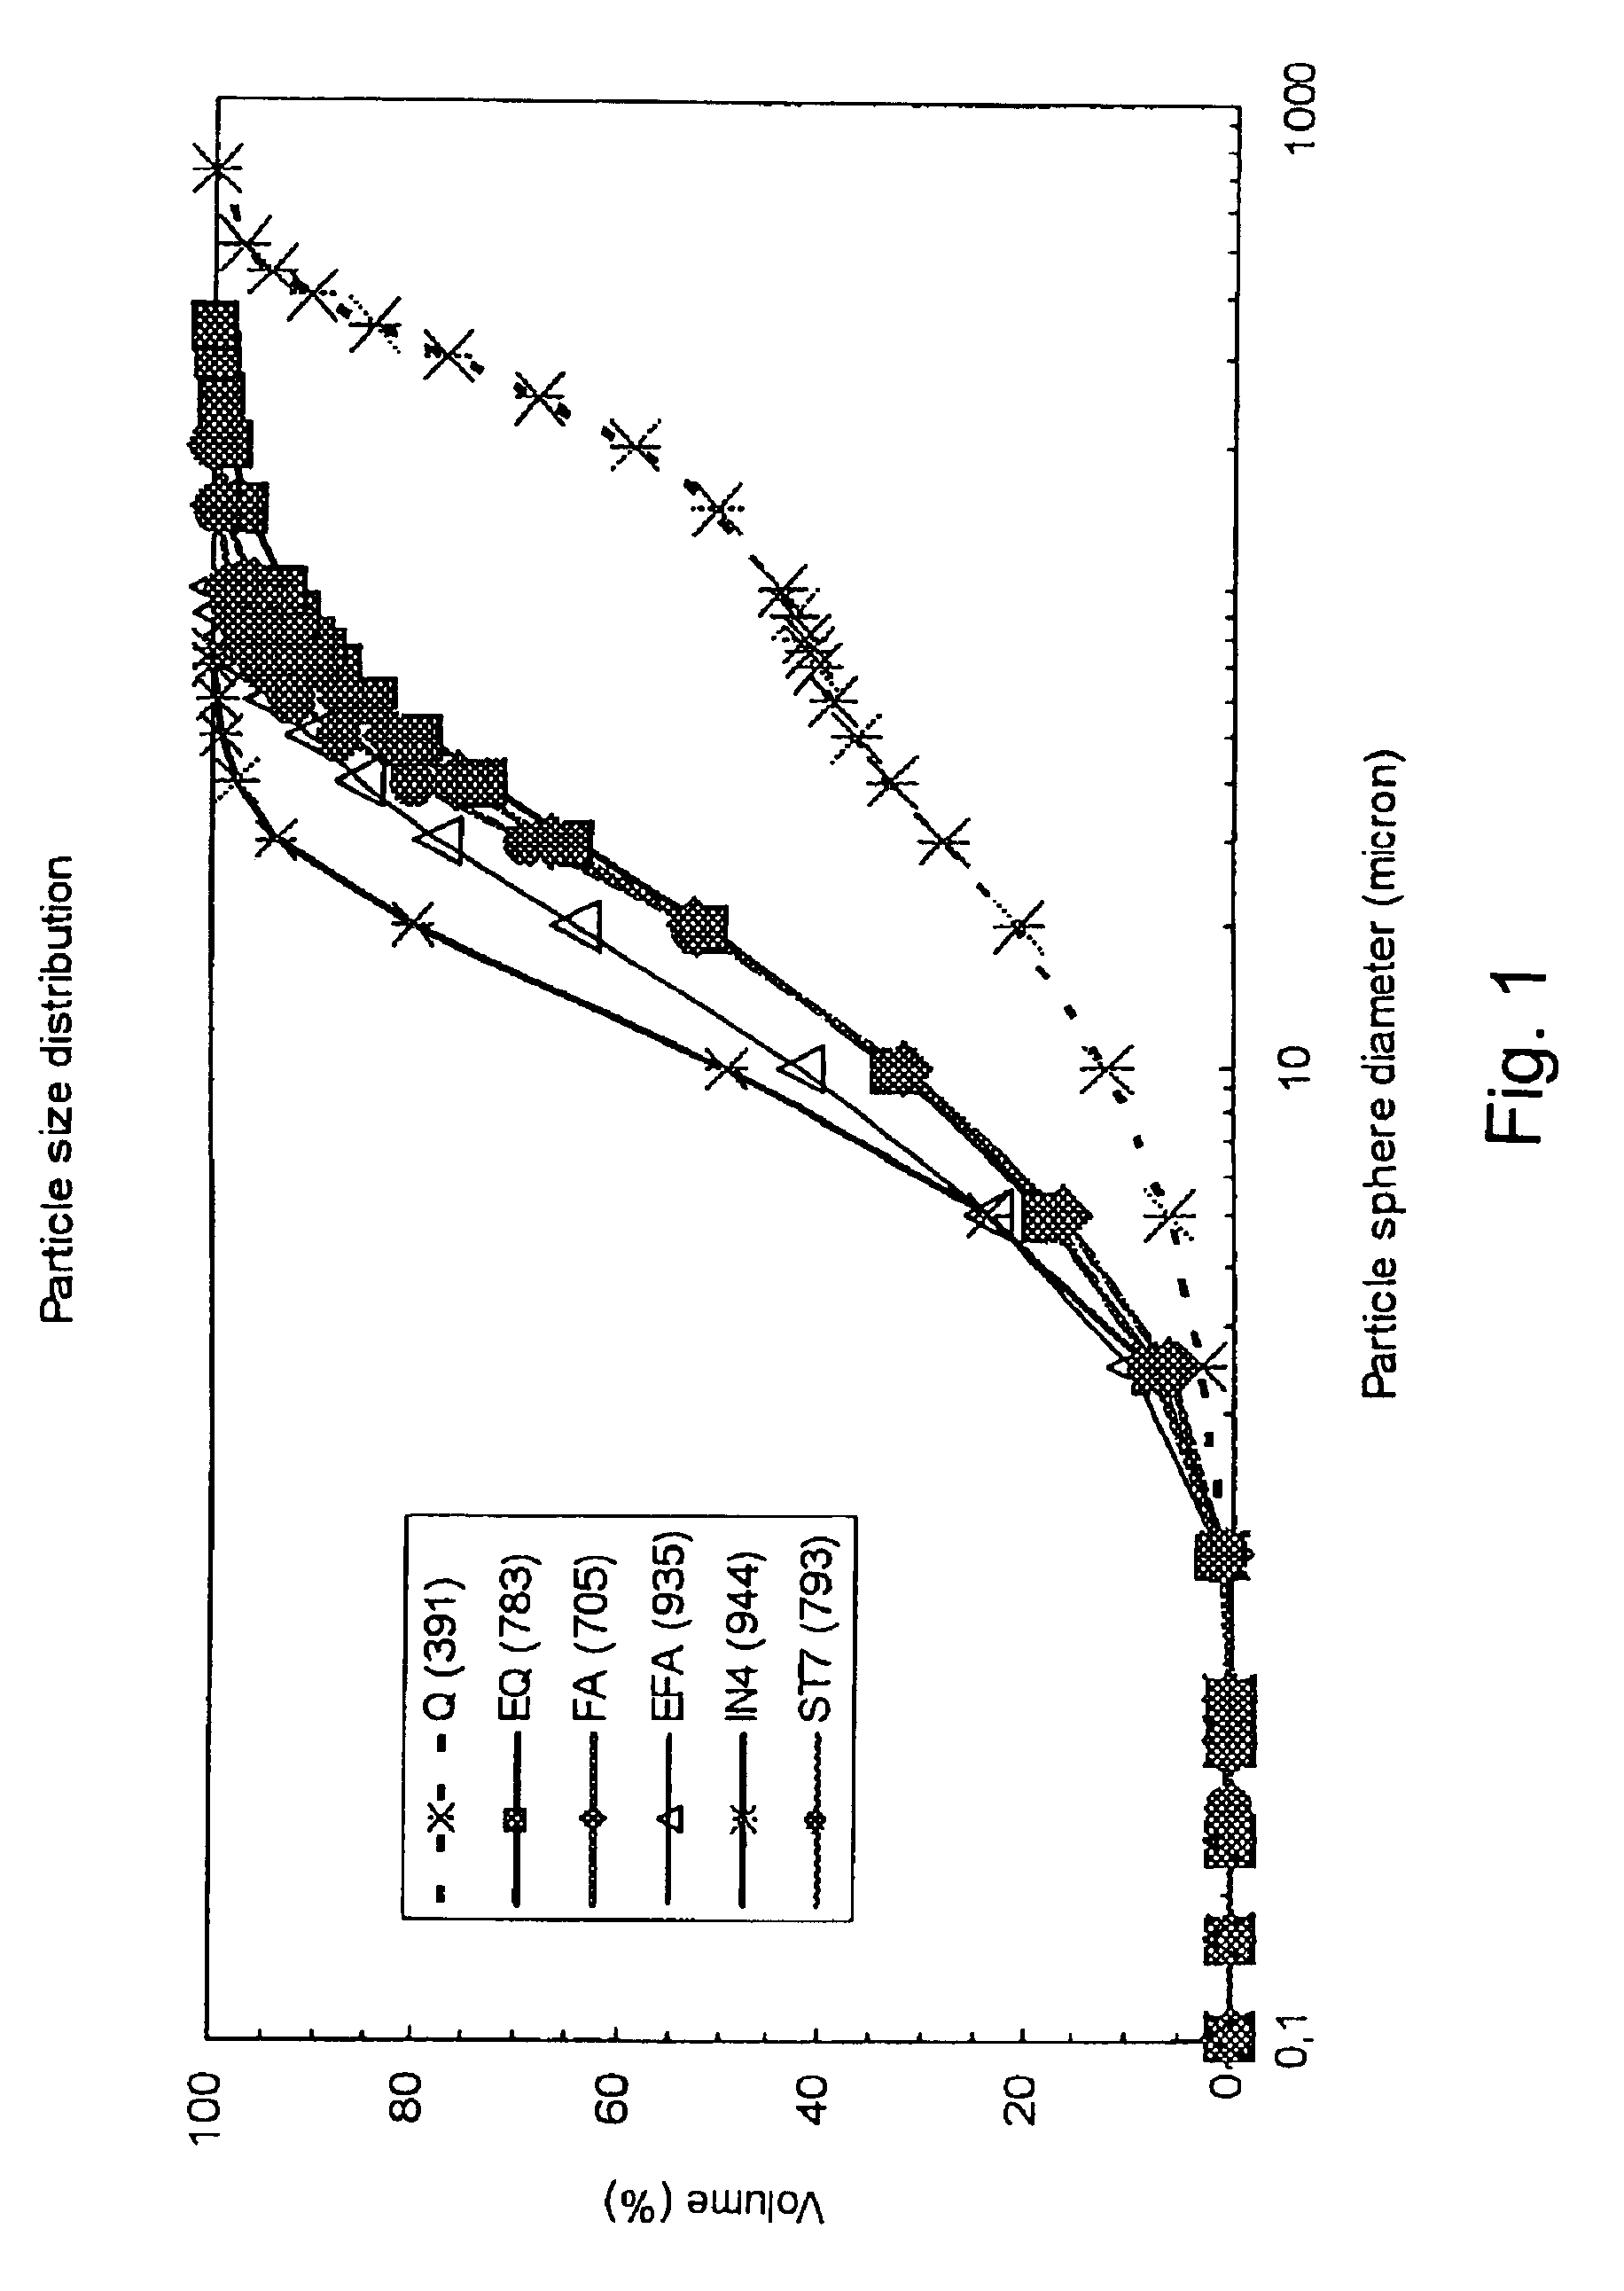 Process for producing blended cements with reduced carbon dioxide emissions